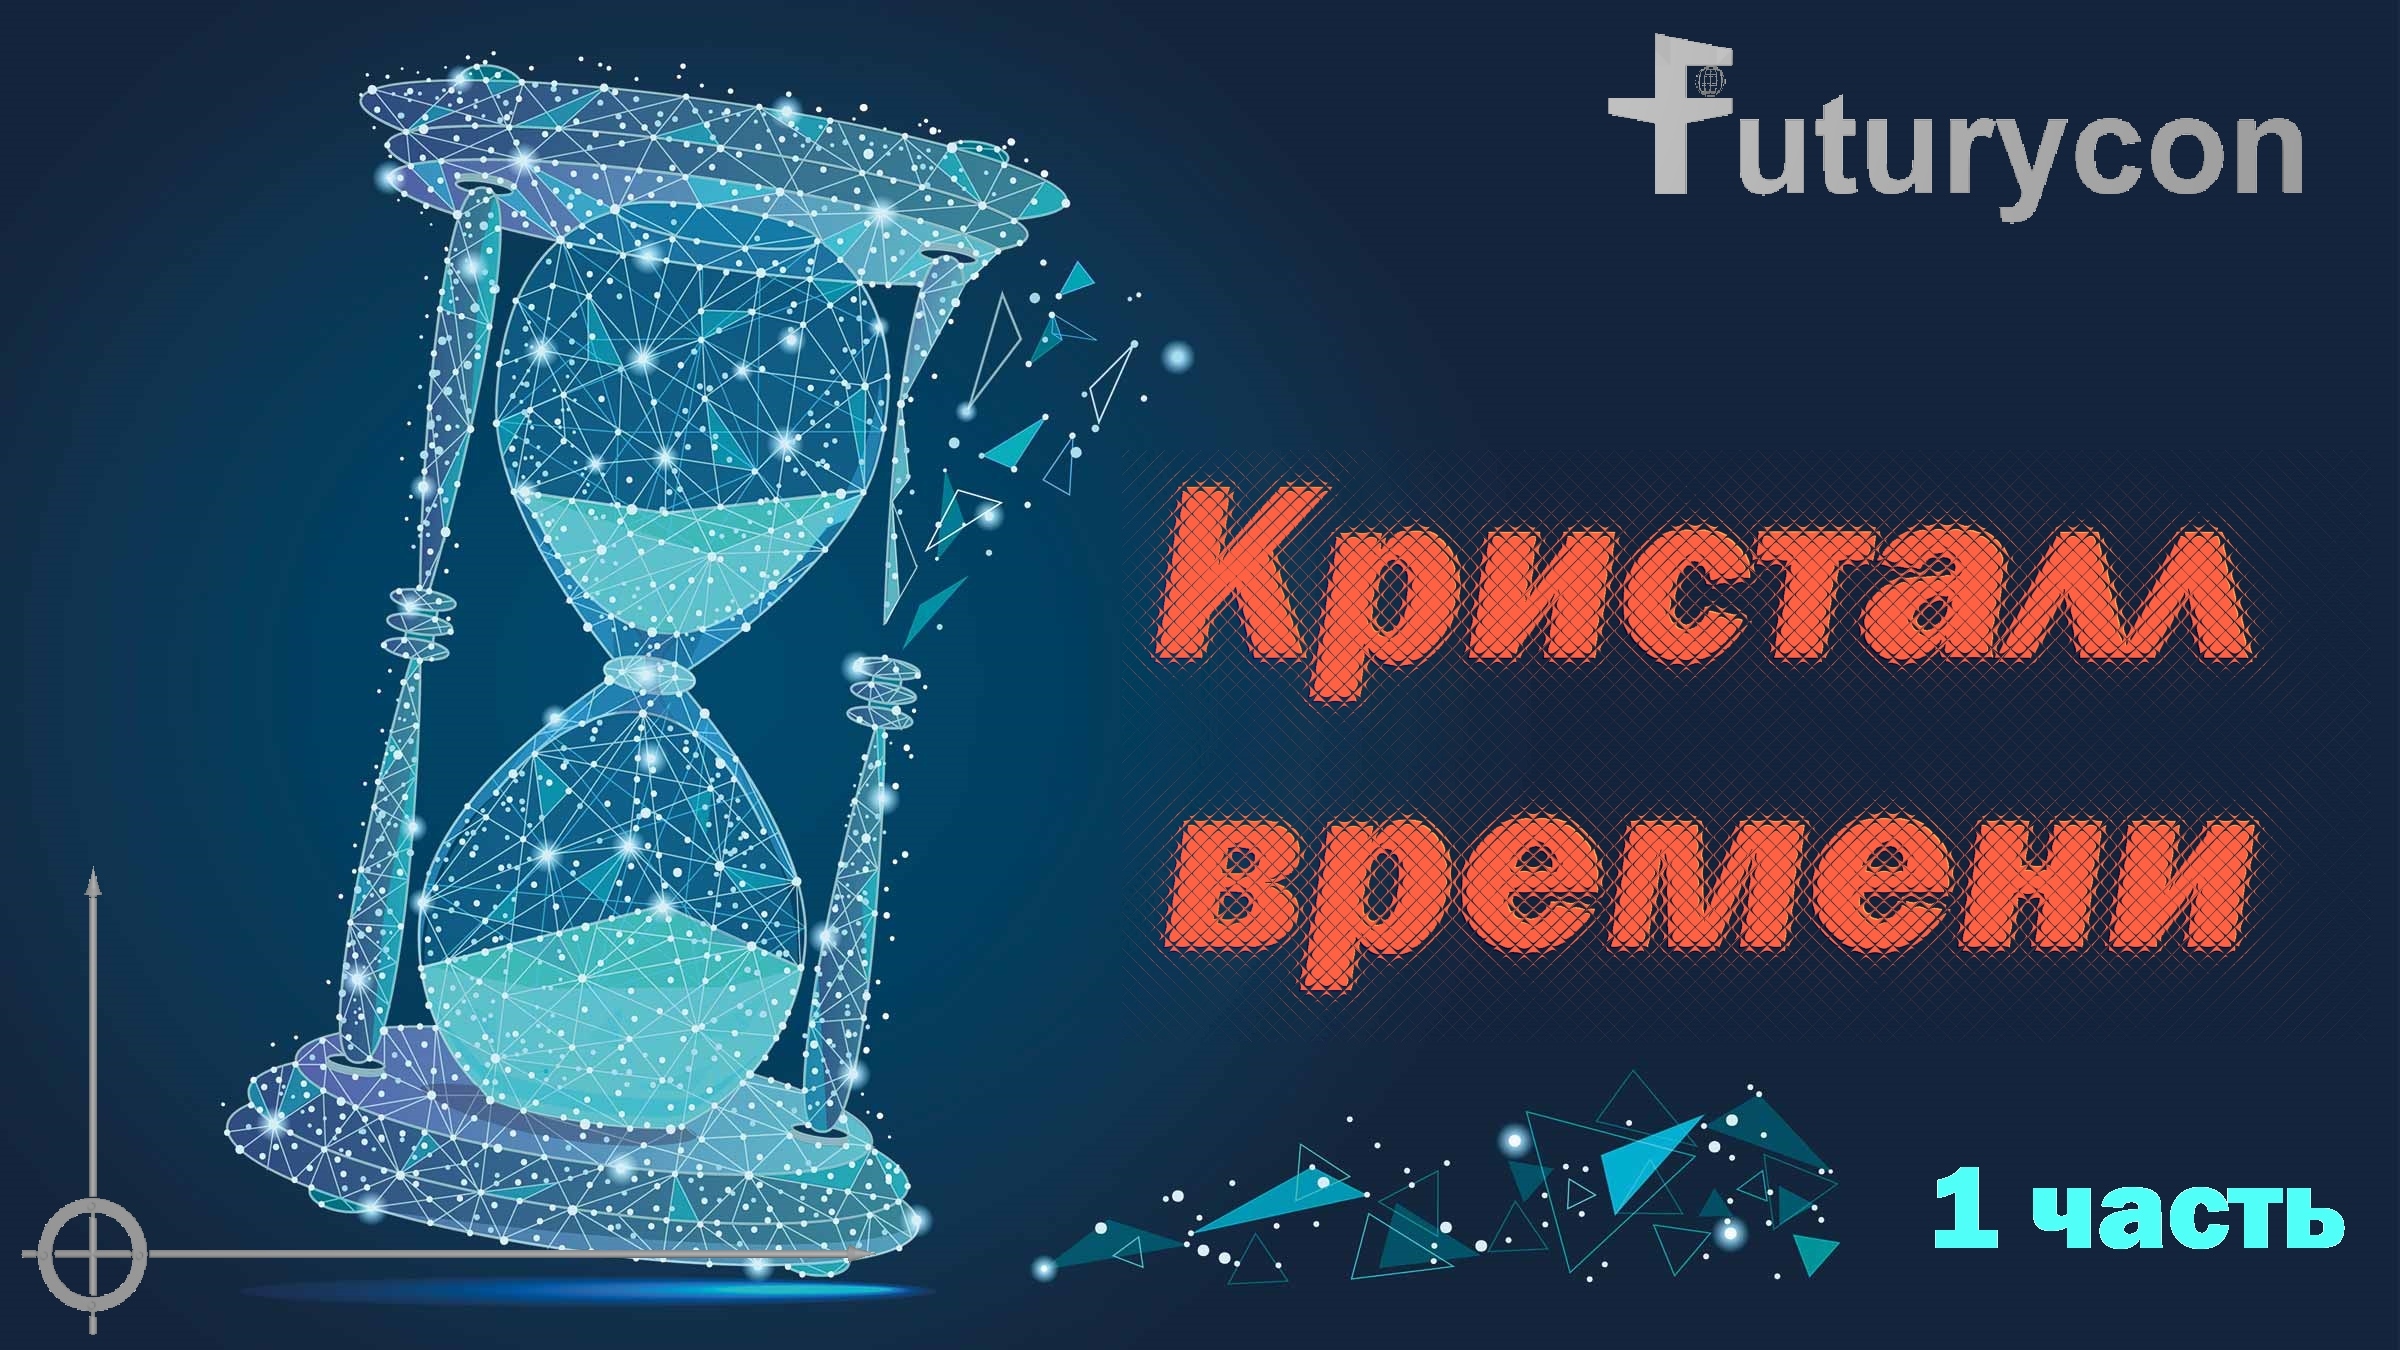 Time crystal. Кристалл времени. Временные Кристаллы. Темпоральный Кристалл. Кристалл времени физика.